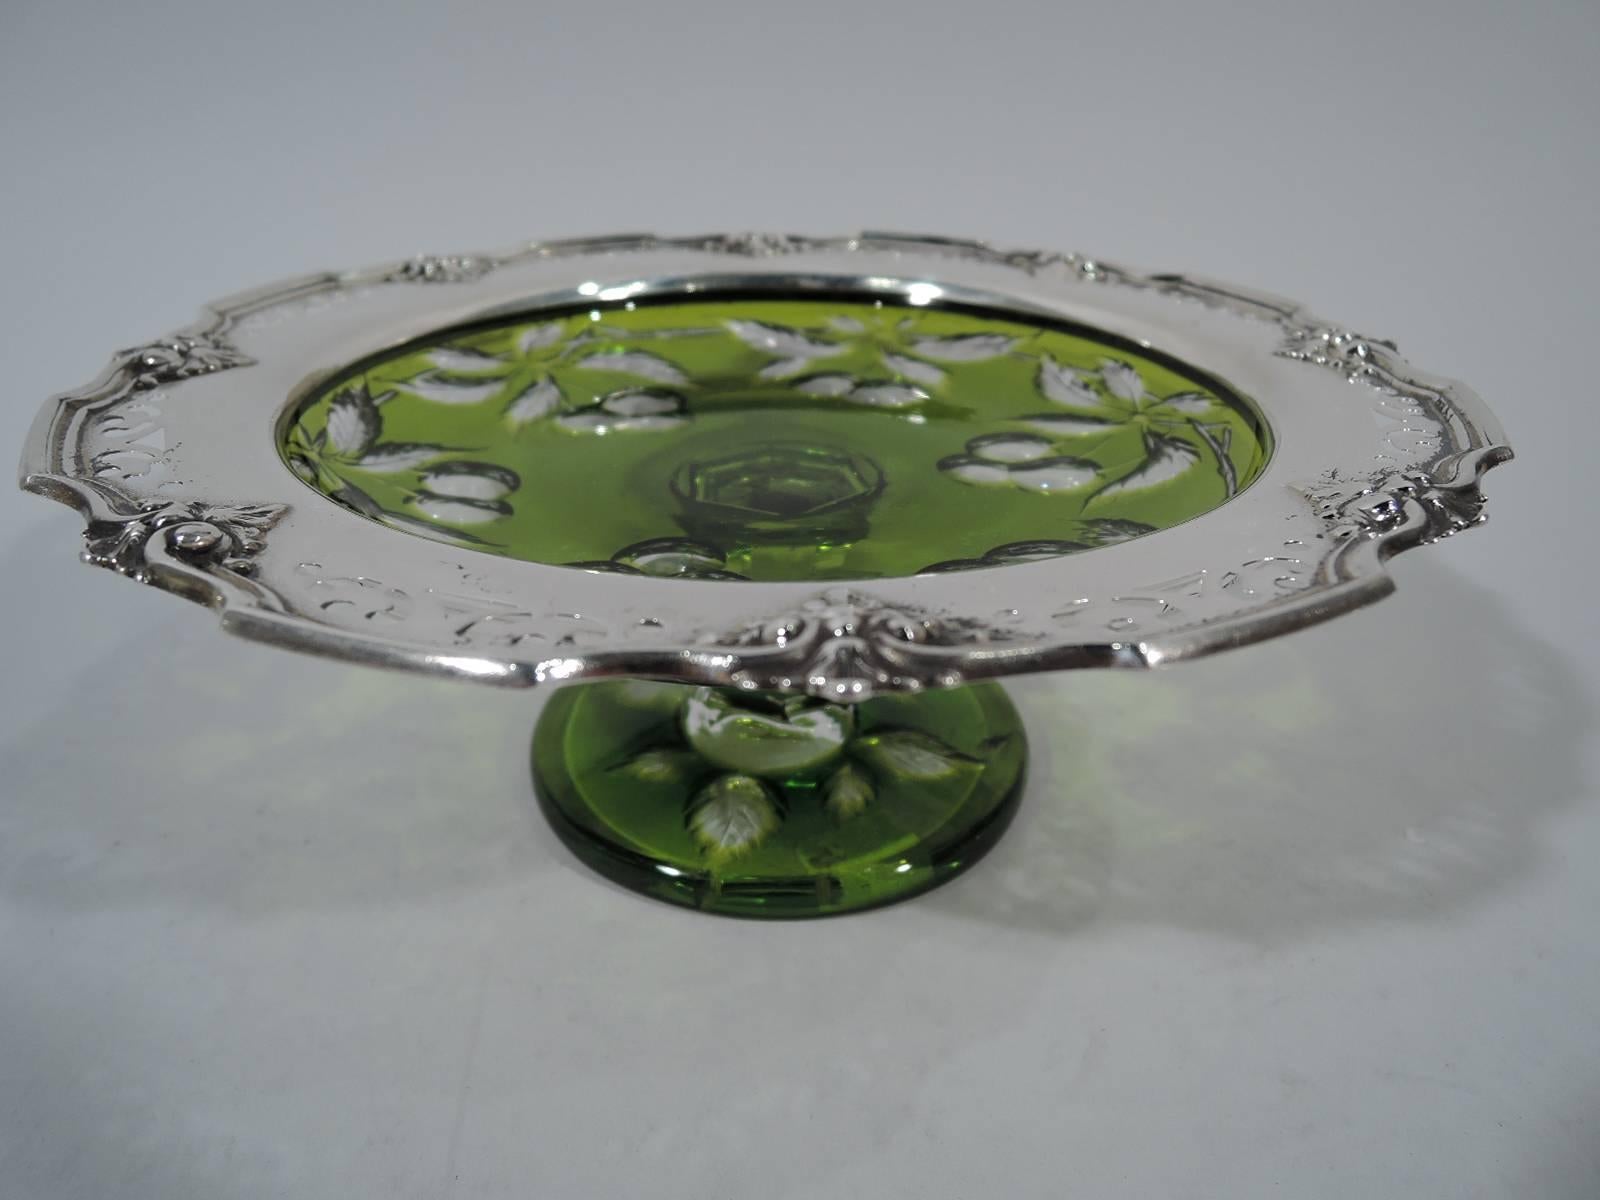 Pair of Edwardian sterling silver and cut-to-clear glass compotes. Made by Gorham in Providence in 1907. Each: Shallow bowl, short faceted stem, and flat circular foot. Olive glass with cut-to-clear cherries. Sterling silver rim with applied